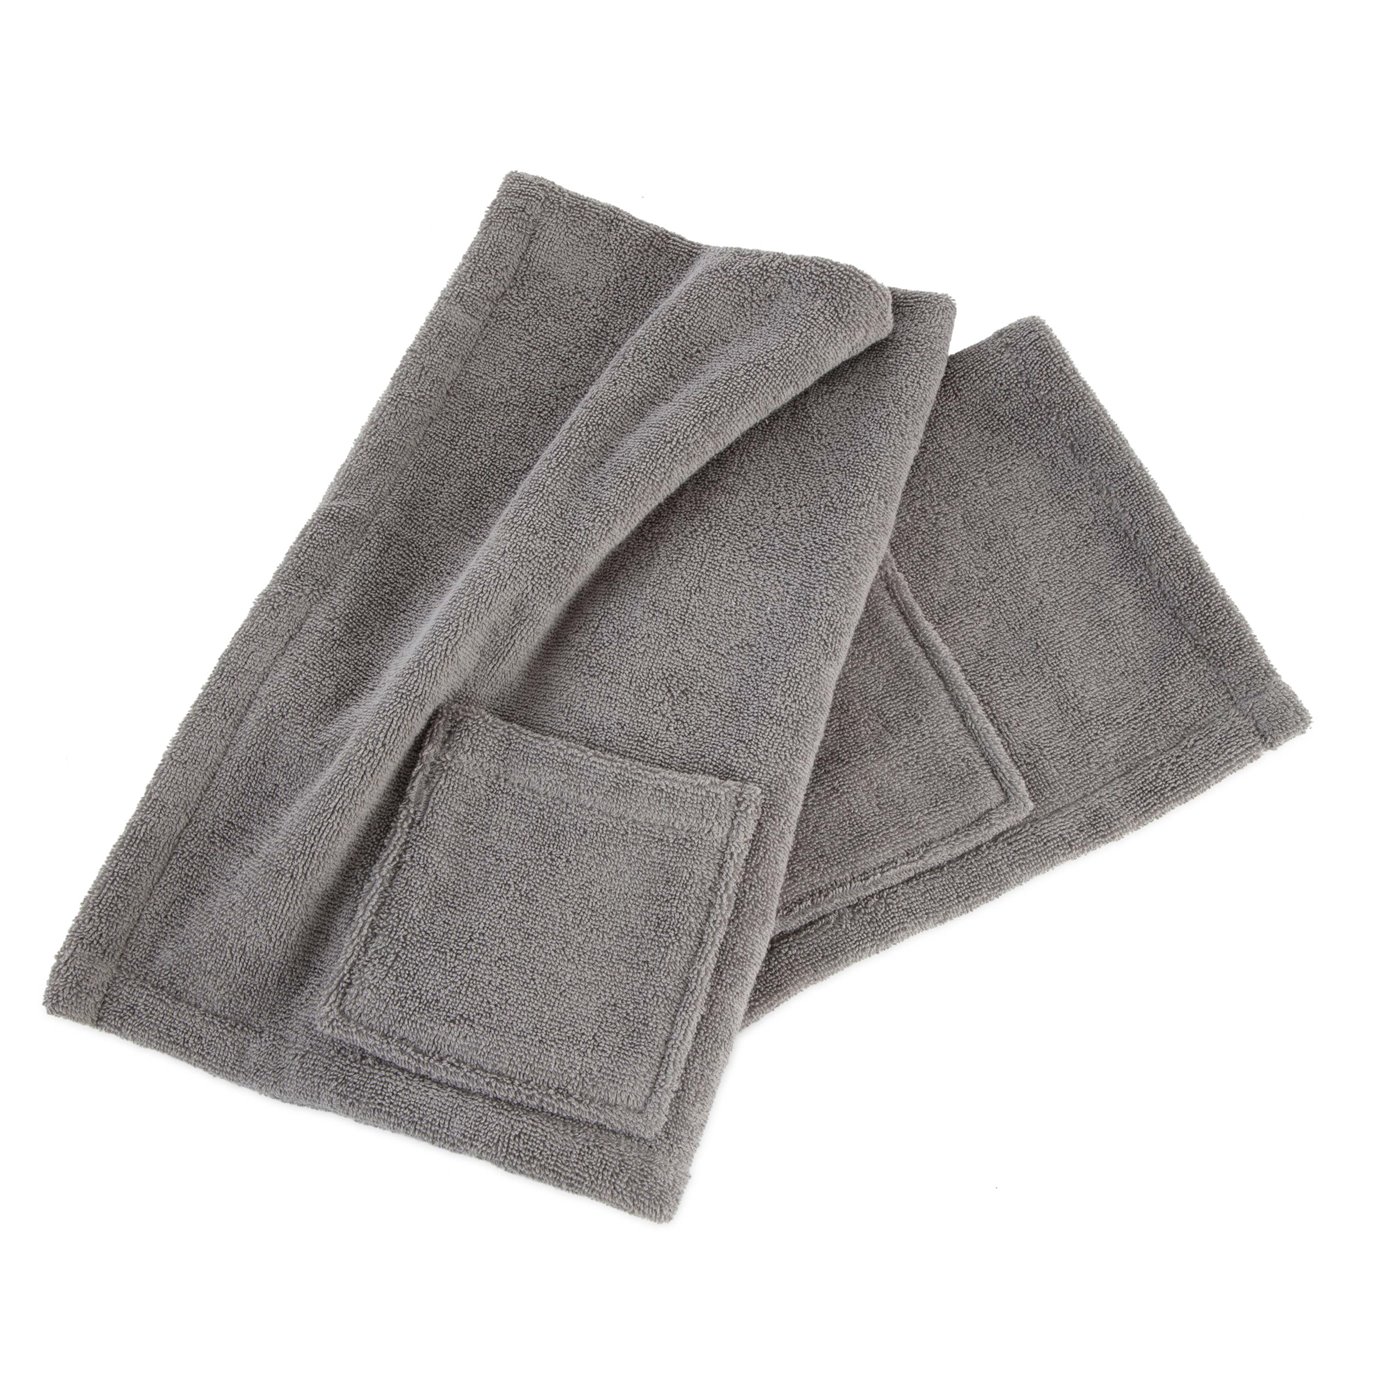 Martex Purity 2-Pack Solid Gray Pet Towel Set by WestPoint Home